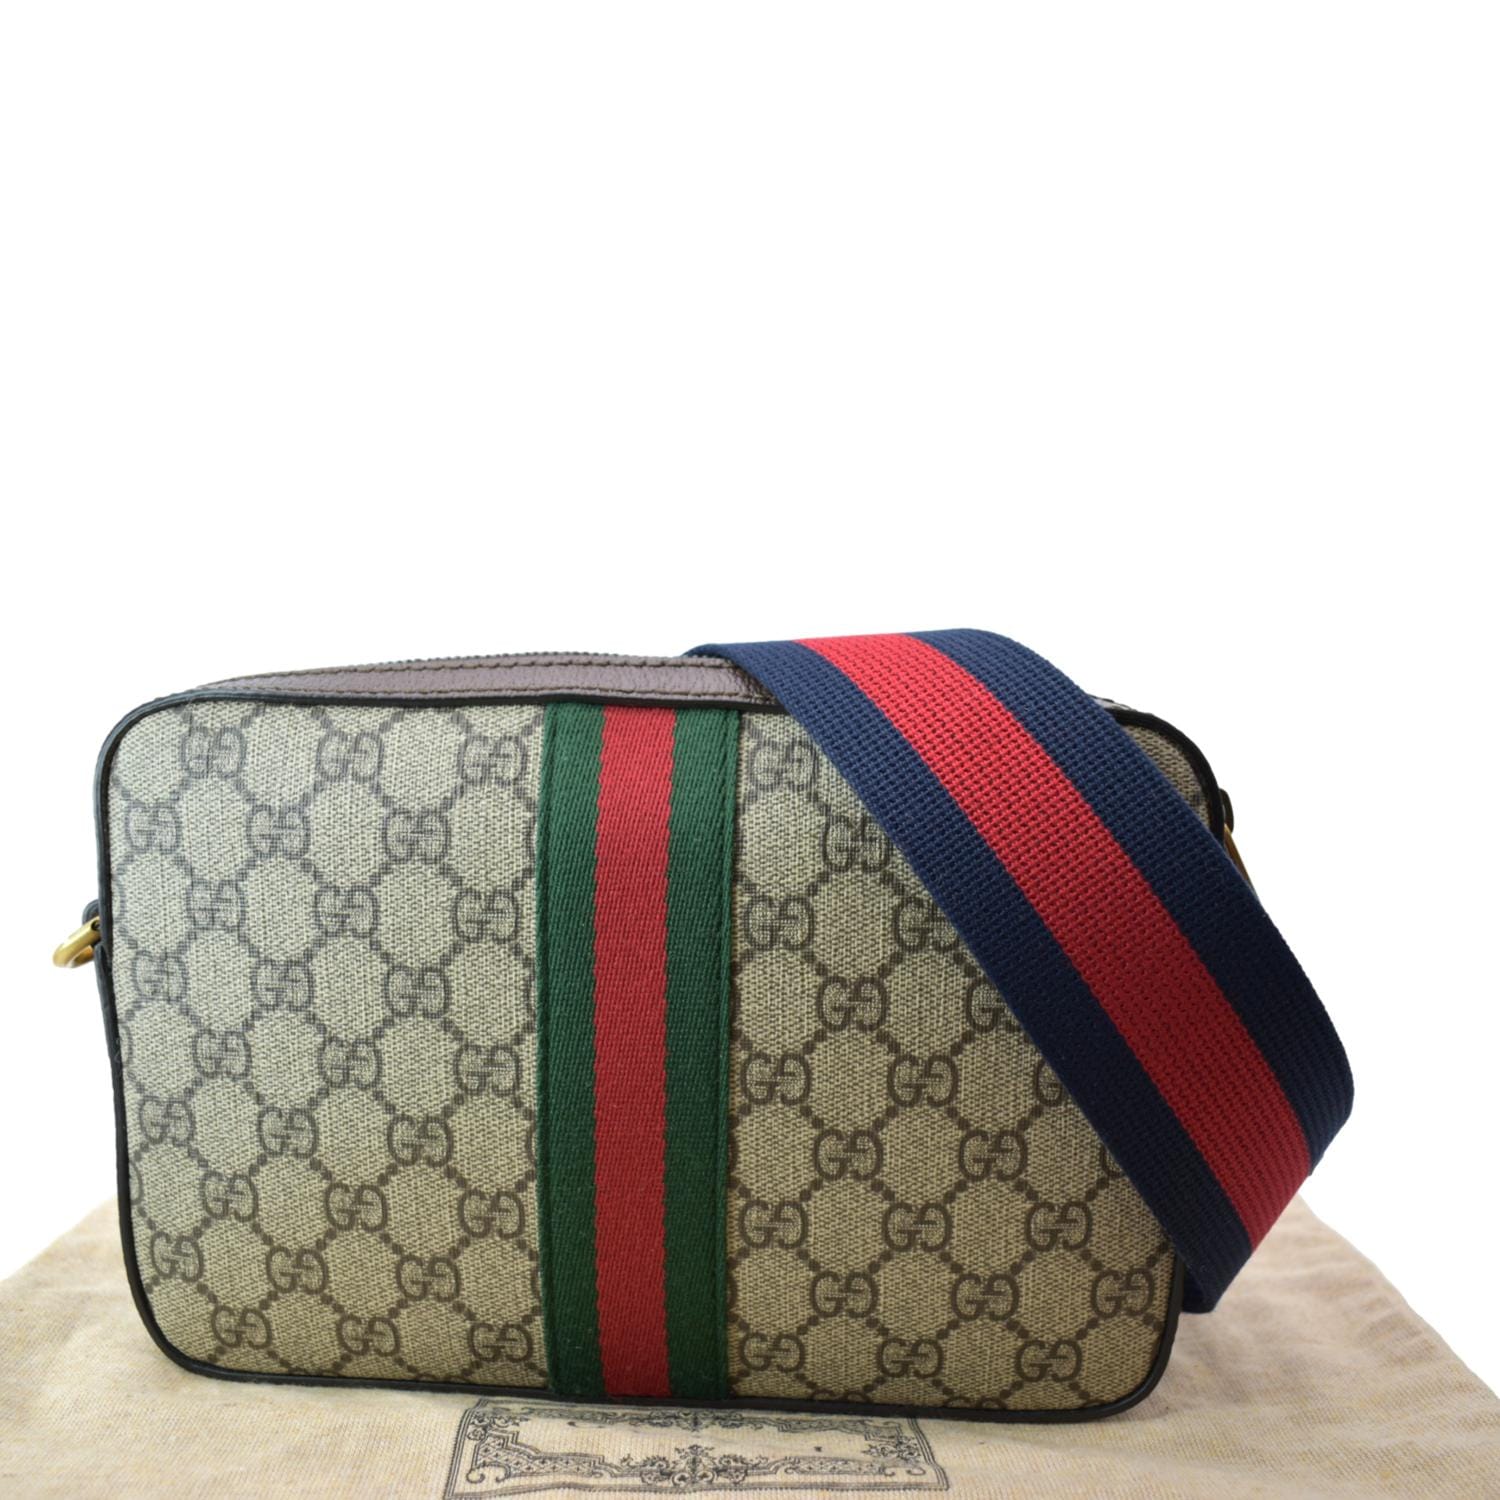 Gucci - Looking at new Gucci Ophidia totes from the Gucci